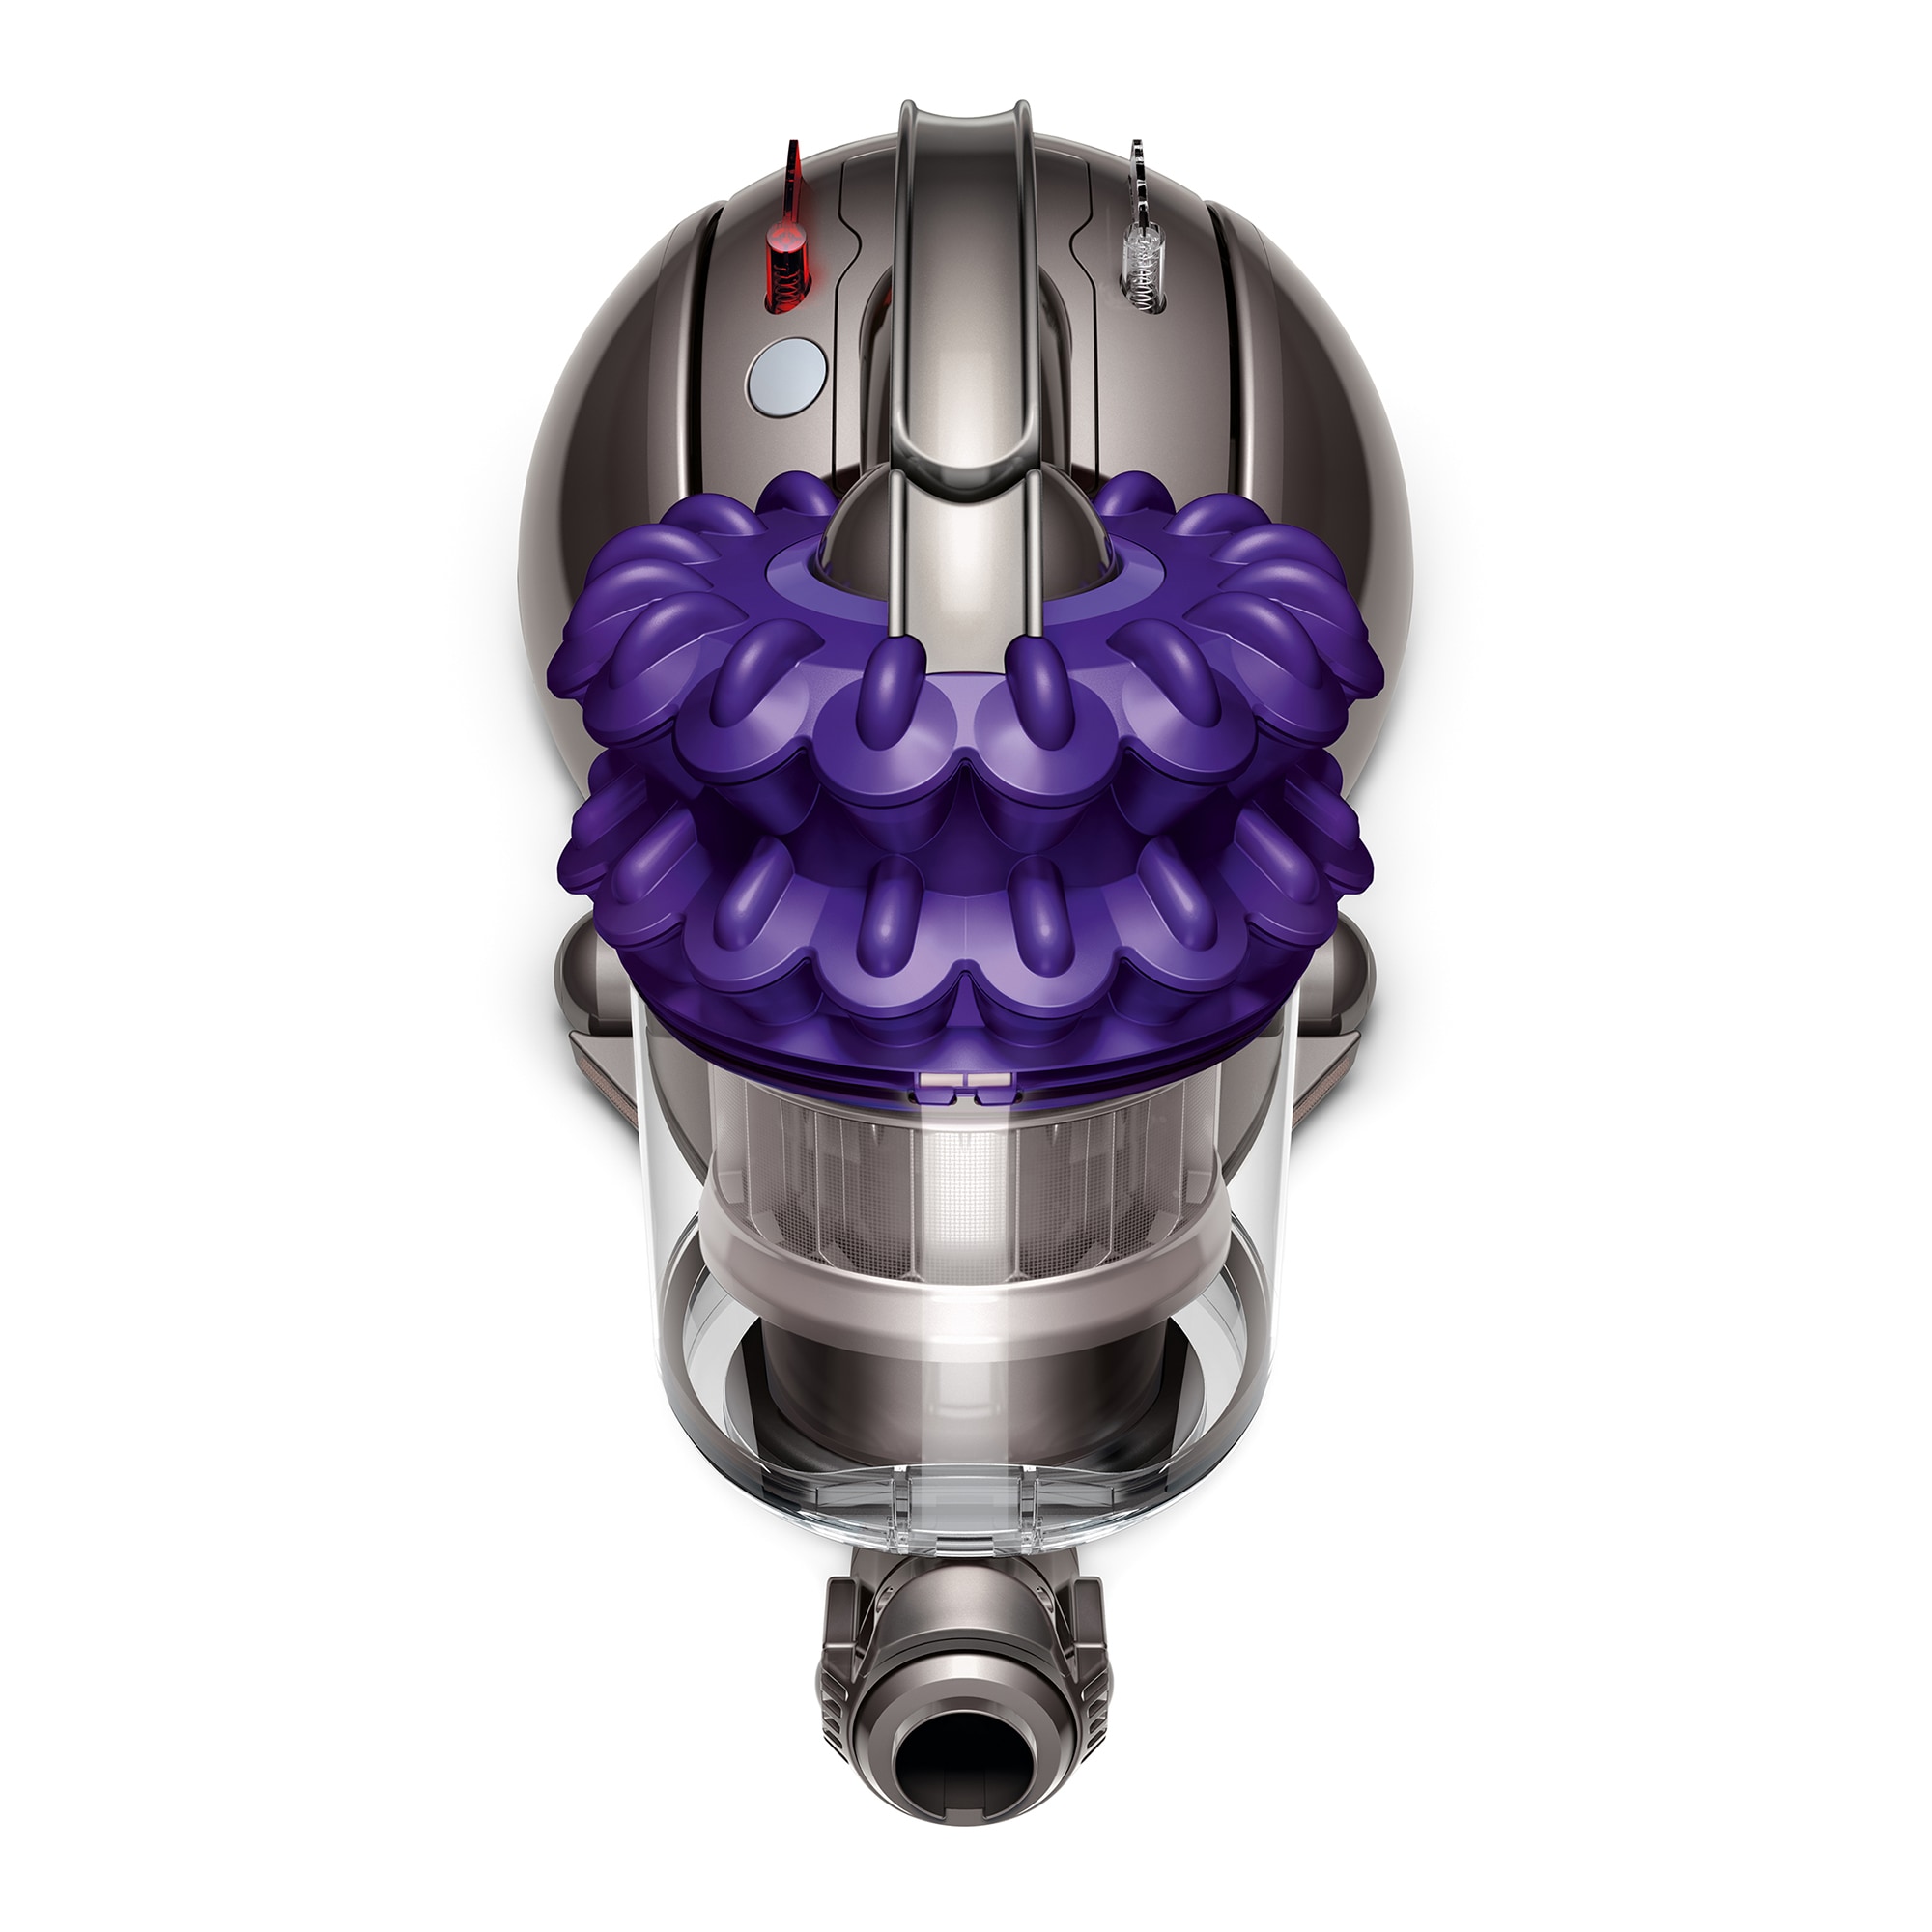 Dyson DC47 Animal Ball Compact Canister Vacuum in the Canister 